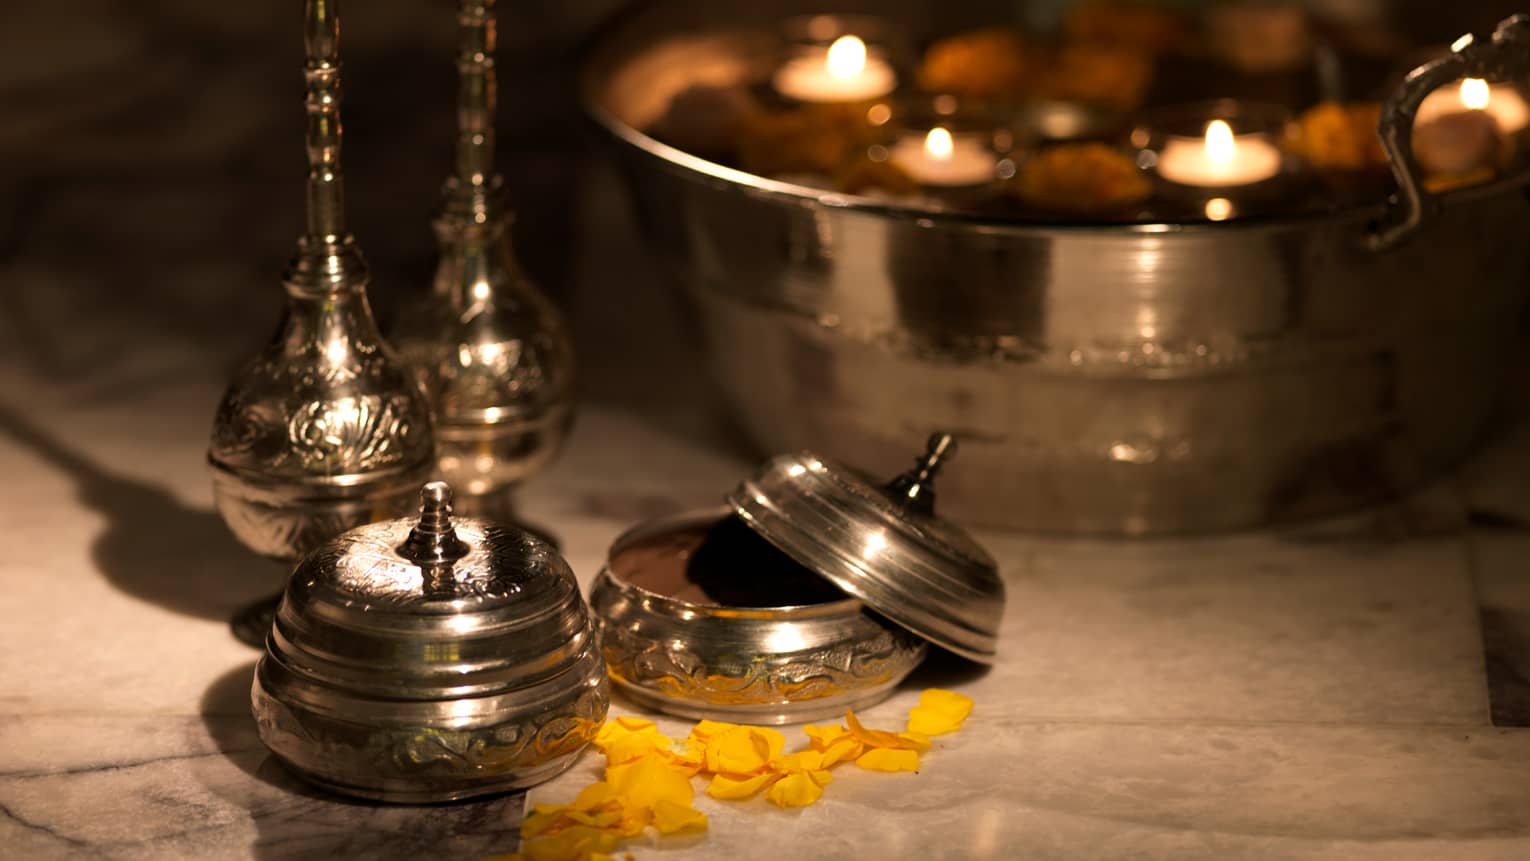 Spa ingredients lay on table with metal containers, a bowl with floating votive candles